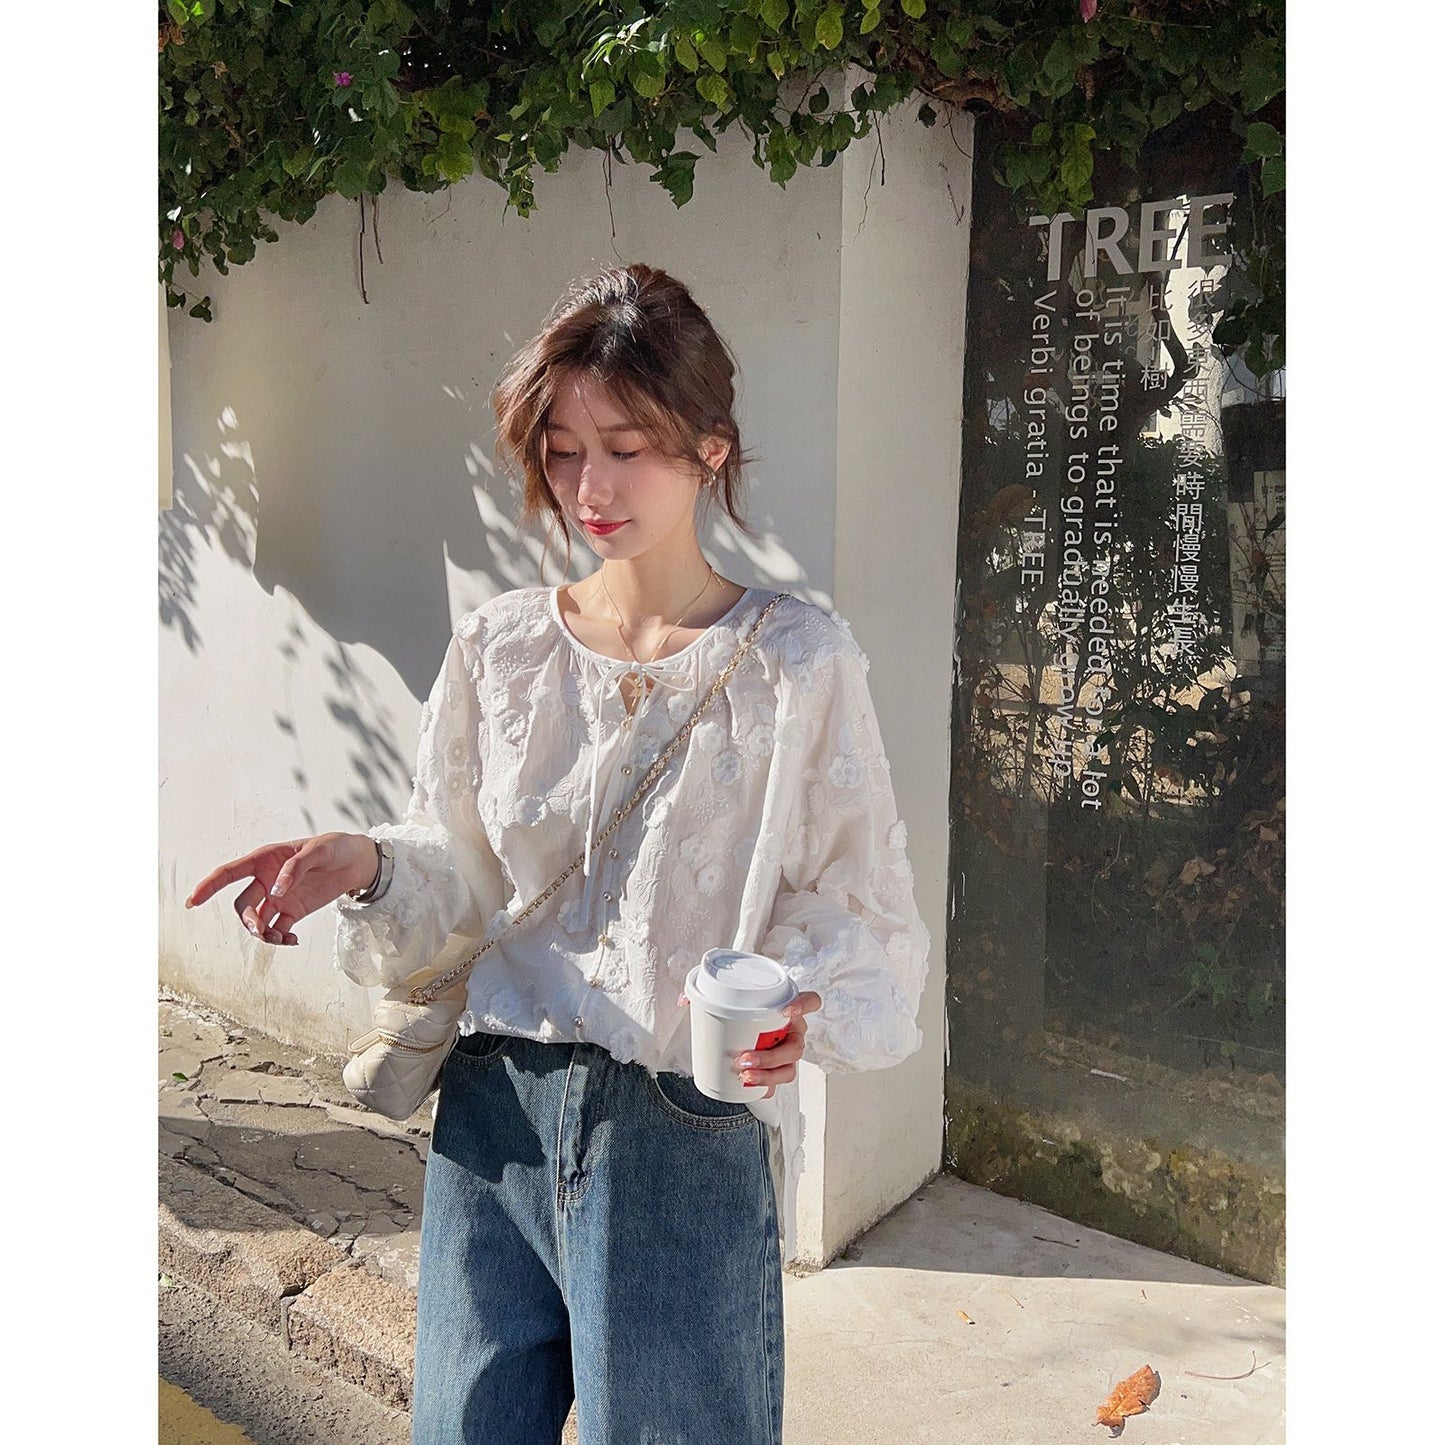 Design Puff Sleeve White Shirt Gentle Sweet French Minority Chic Top Young-Looking Small Shirt Spring